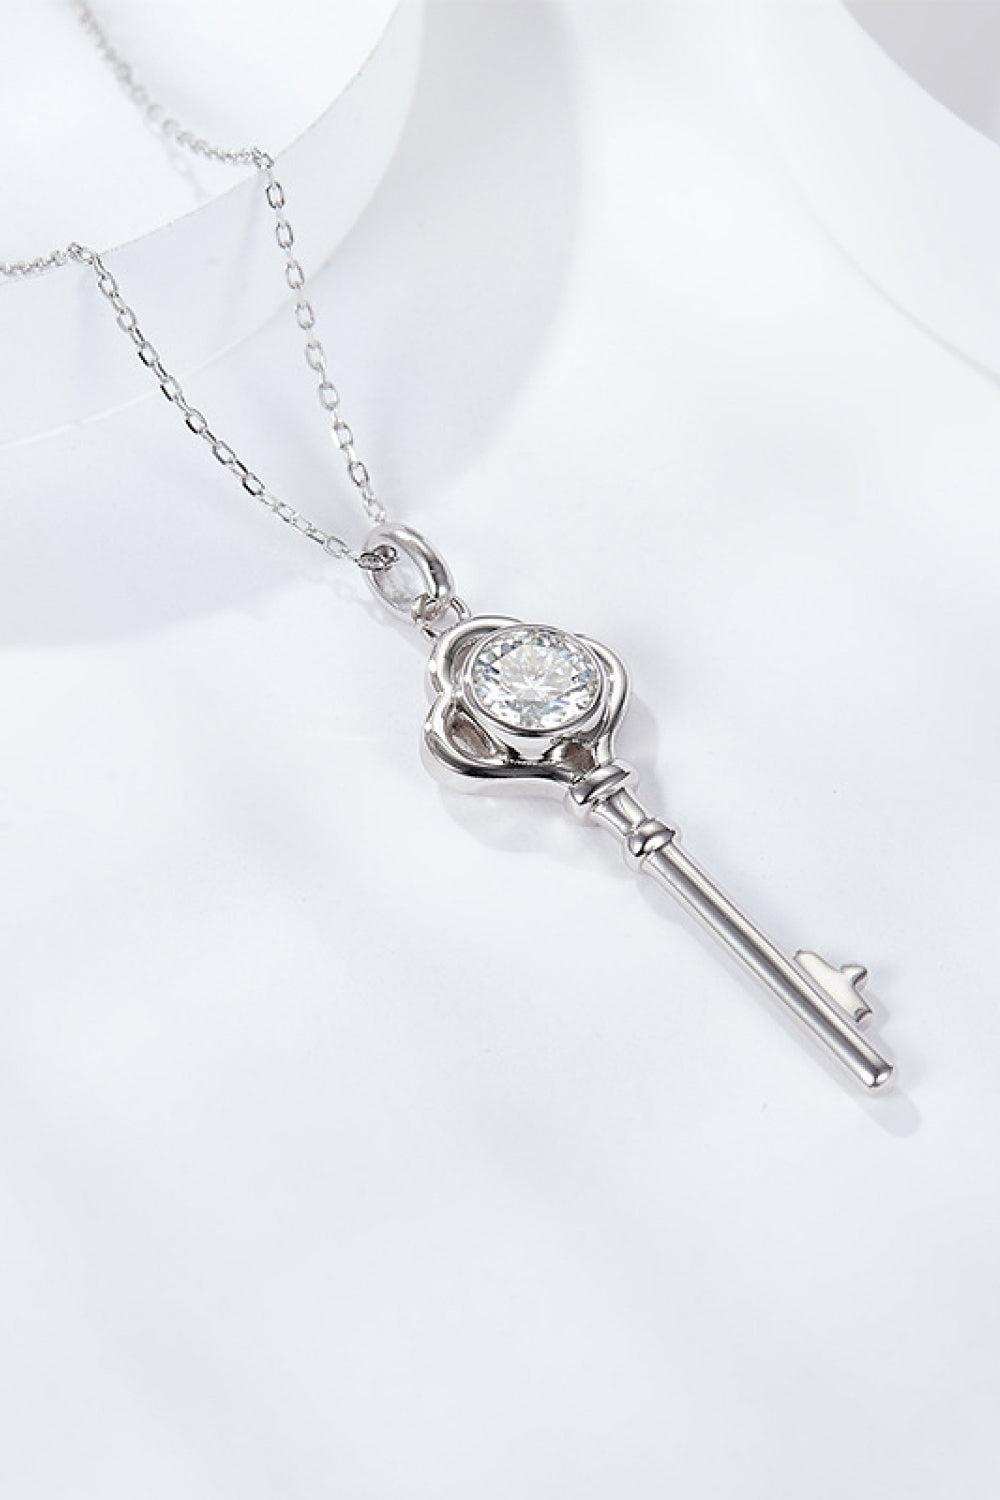 Path to Peace 925 Sterling Silver 1 Carat Moissanite Key Pendant Necklace